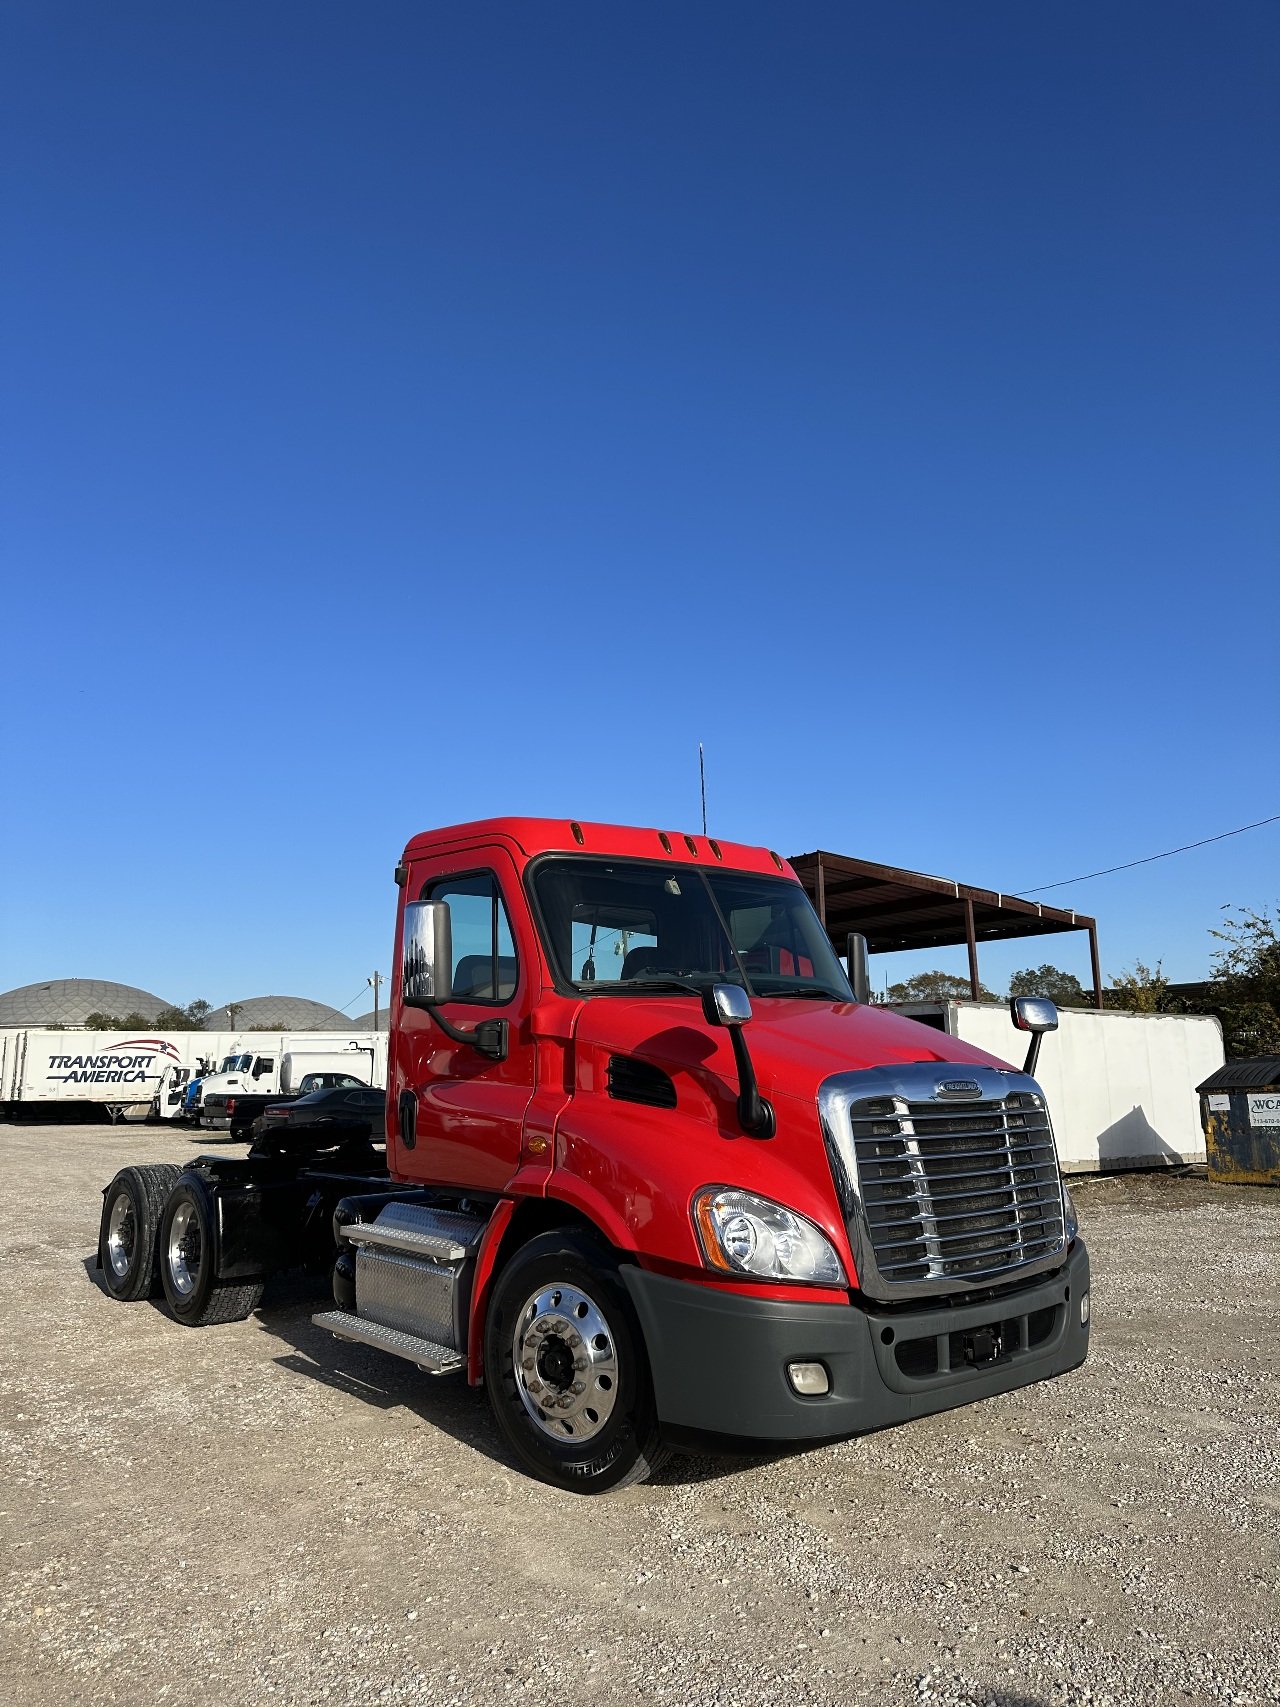 USED 2016 FREIGHTLINER CA113 DAYCAB TRUCK #3663